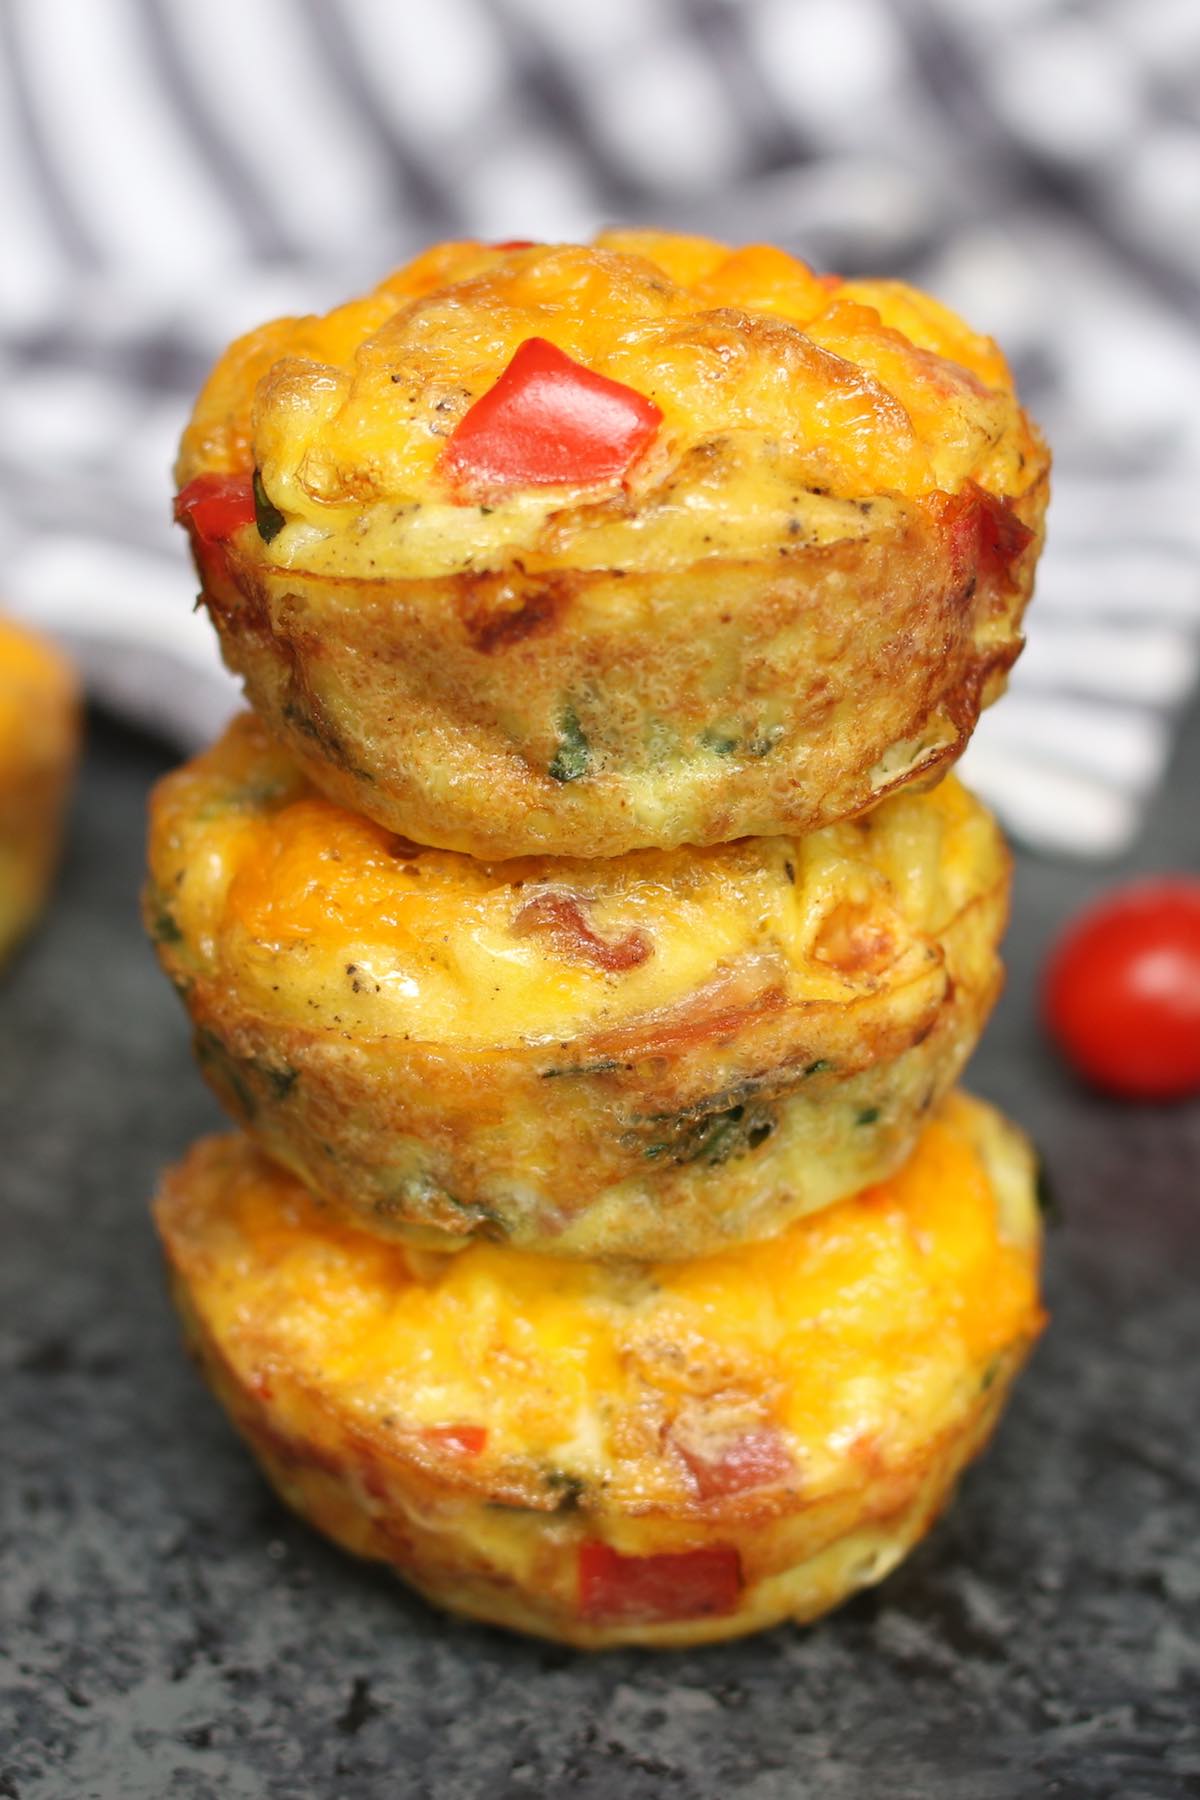 These freezer-friendly Egg Muffins are made with eggs, cheese, bacon, spinach, onions, and bell peppers,. An easy make-ahead recipe, they only takes a few minutes to throw together. These breakfast muffins are delicious, healthy and nutritious, perfect for busy mornings!